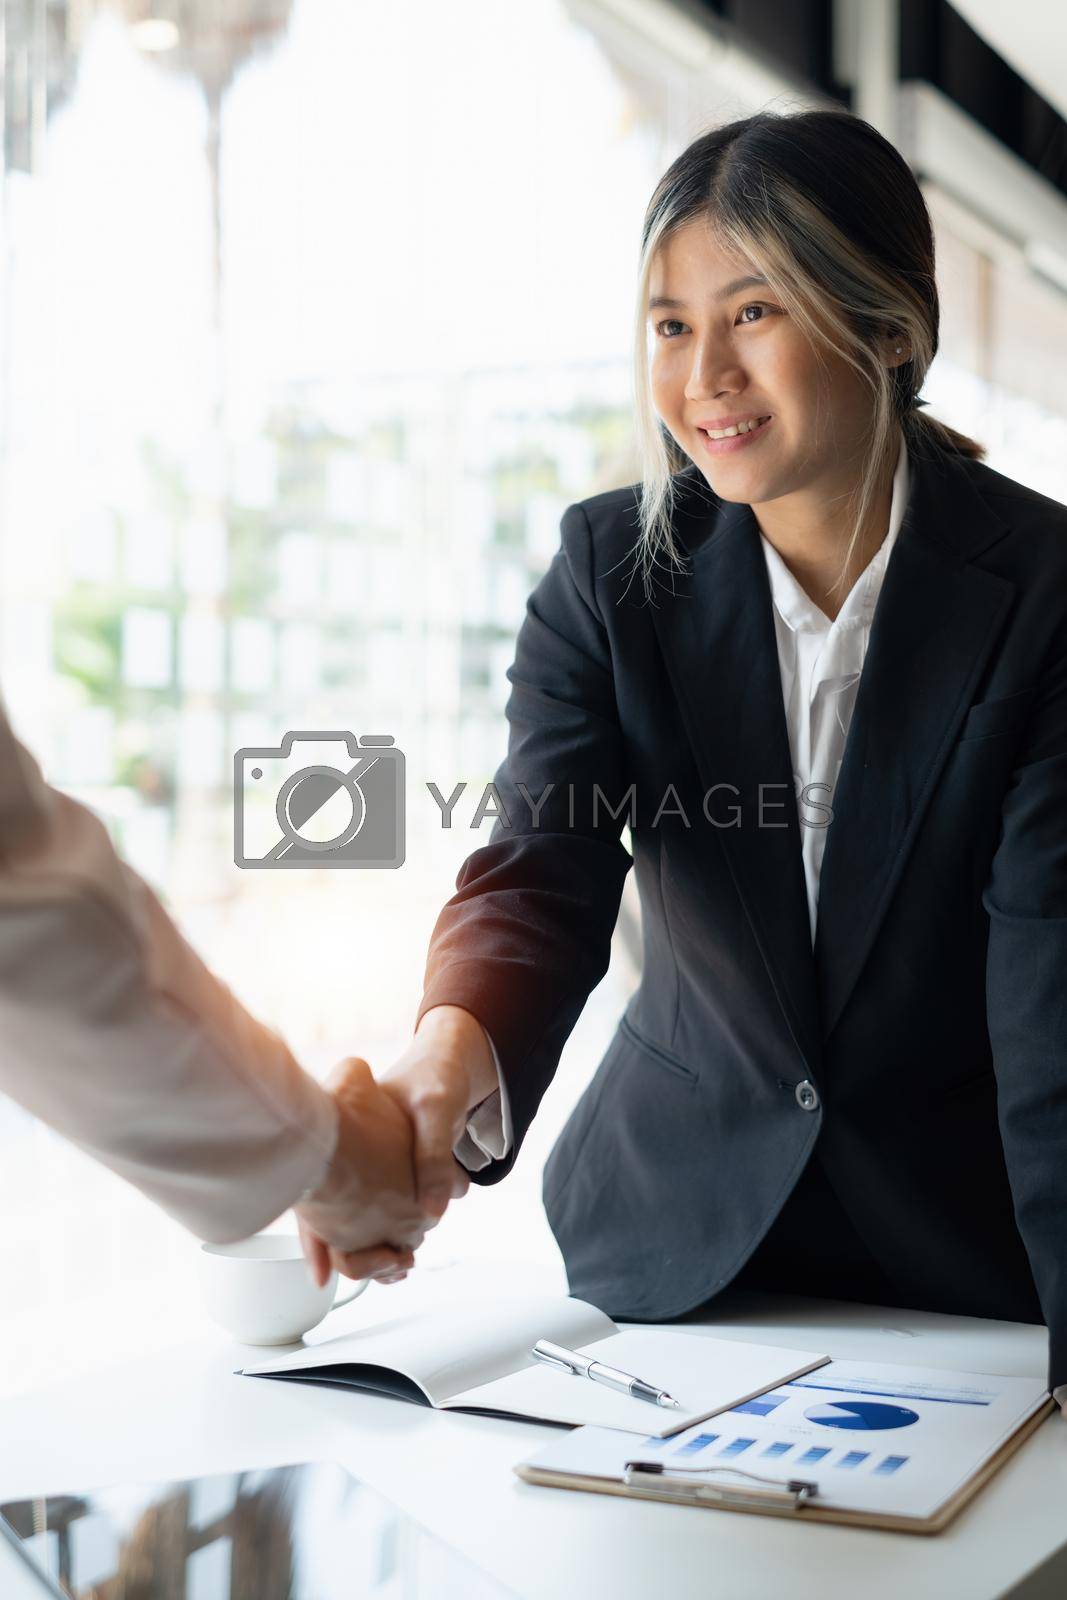 Business people successful negotiation and handshake. celebration partnership and teamwork, business deal concept